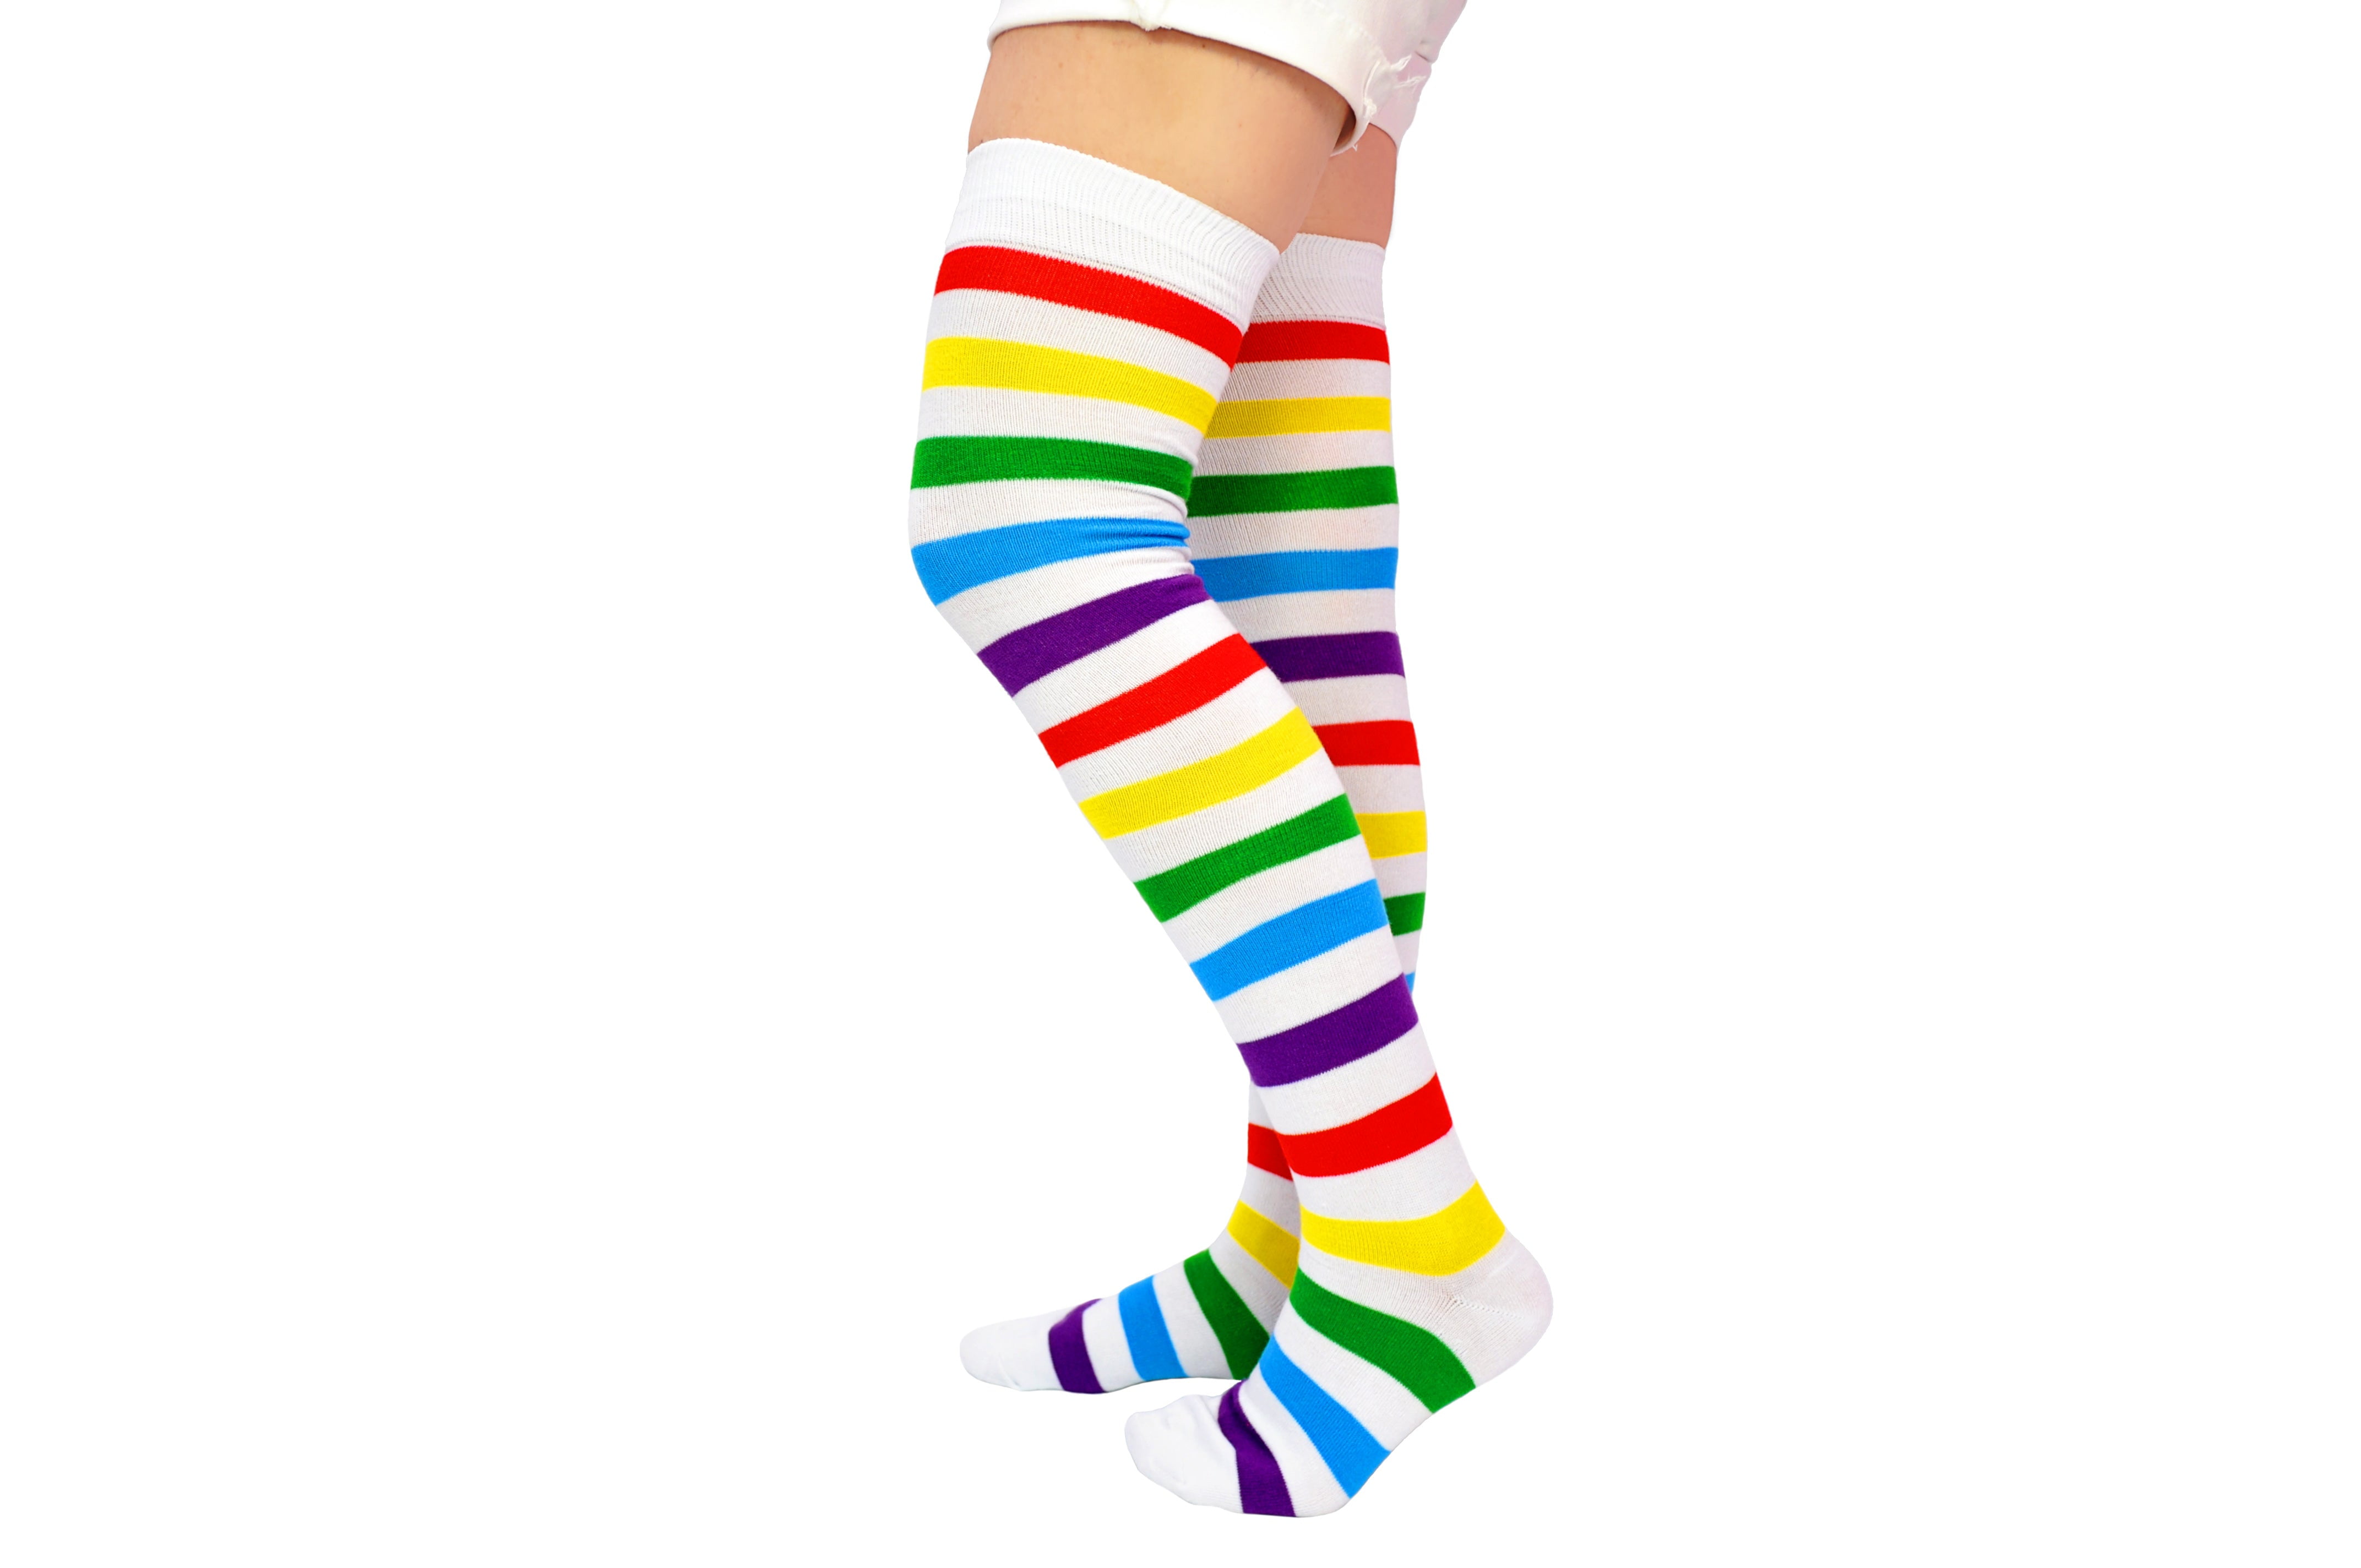 Girlslove talk Rainbow Thick Knee Arm Warmer Leg Stocking Colorful Thigh High Socks Party Striped Accessory Decoration Rainbow Color